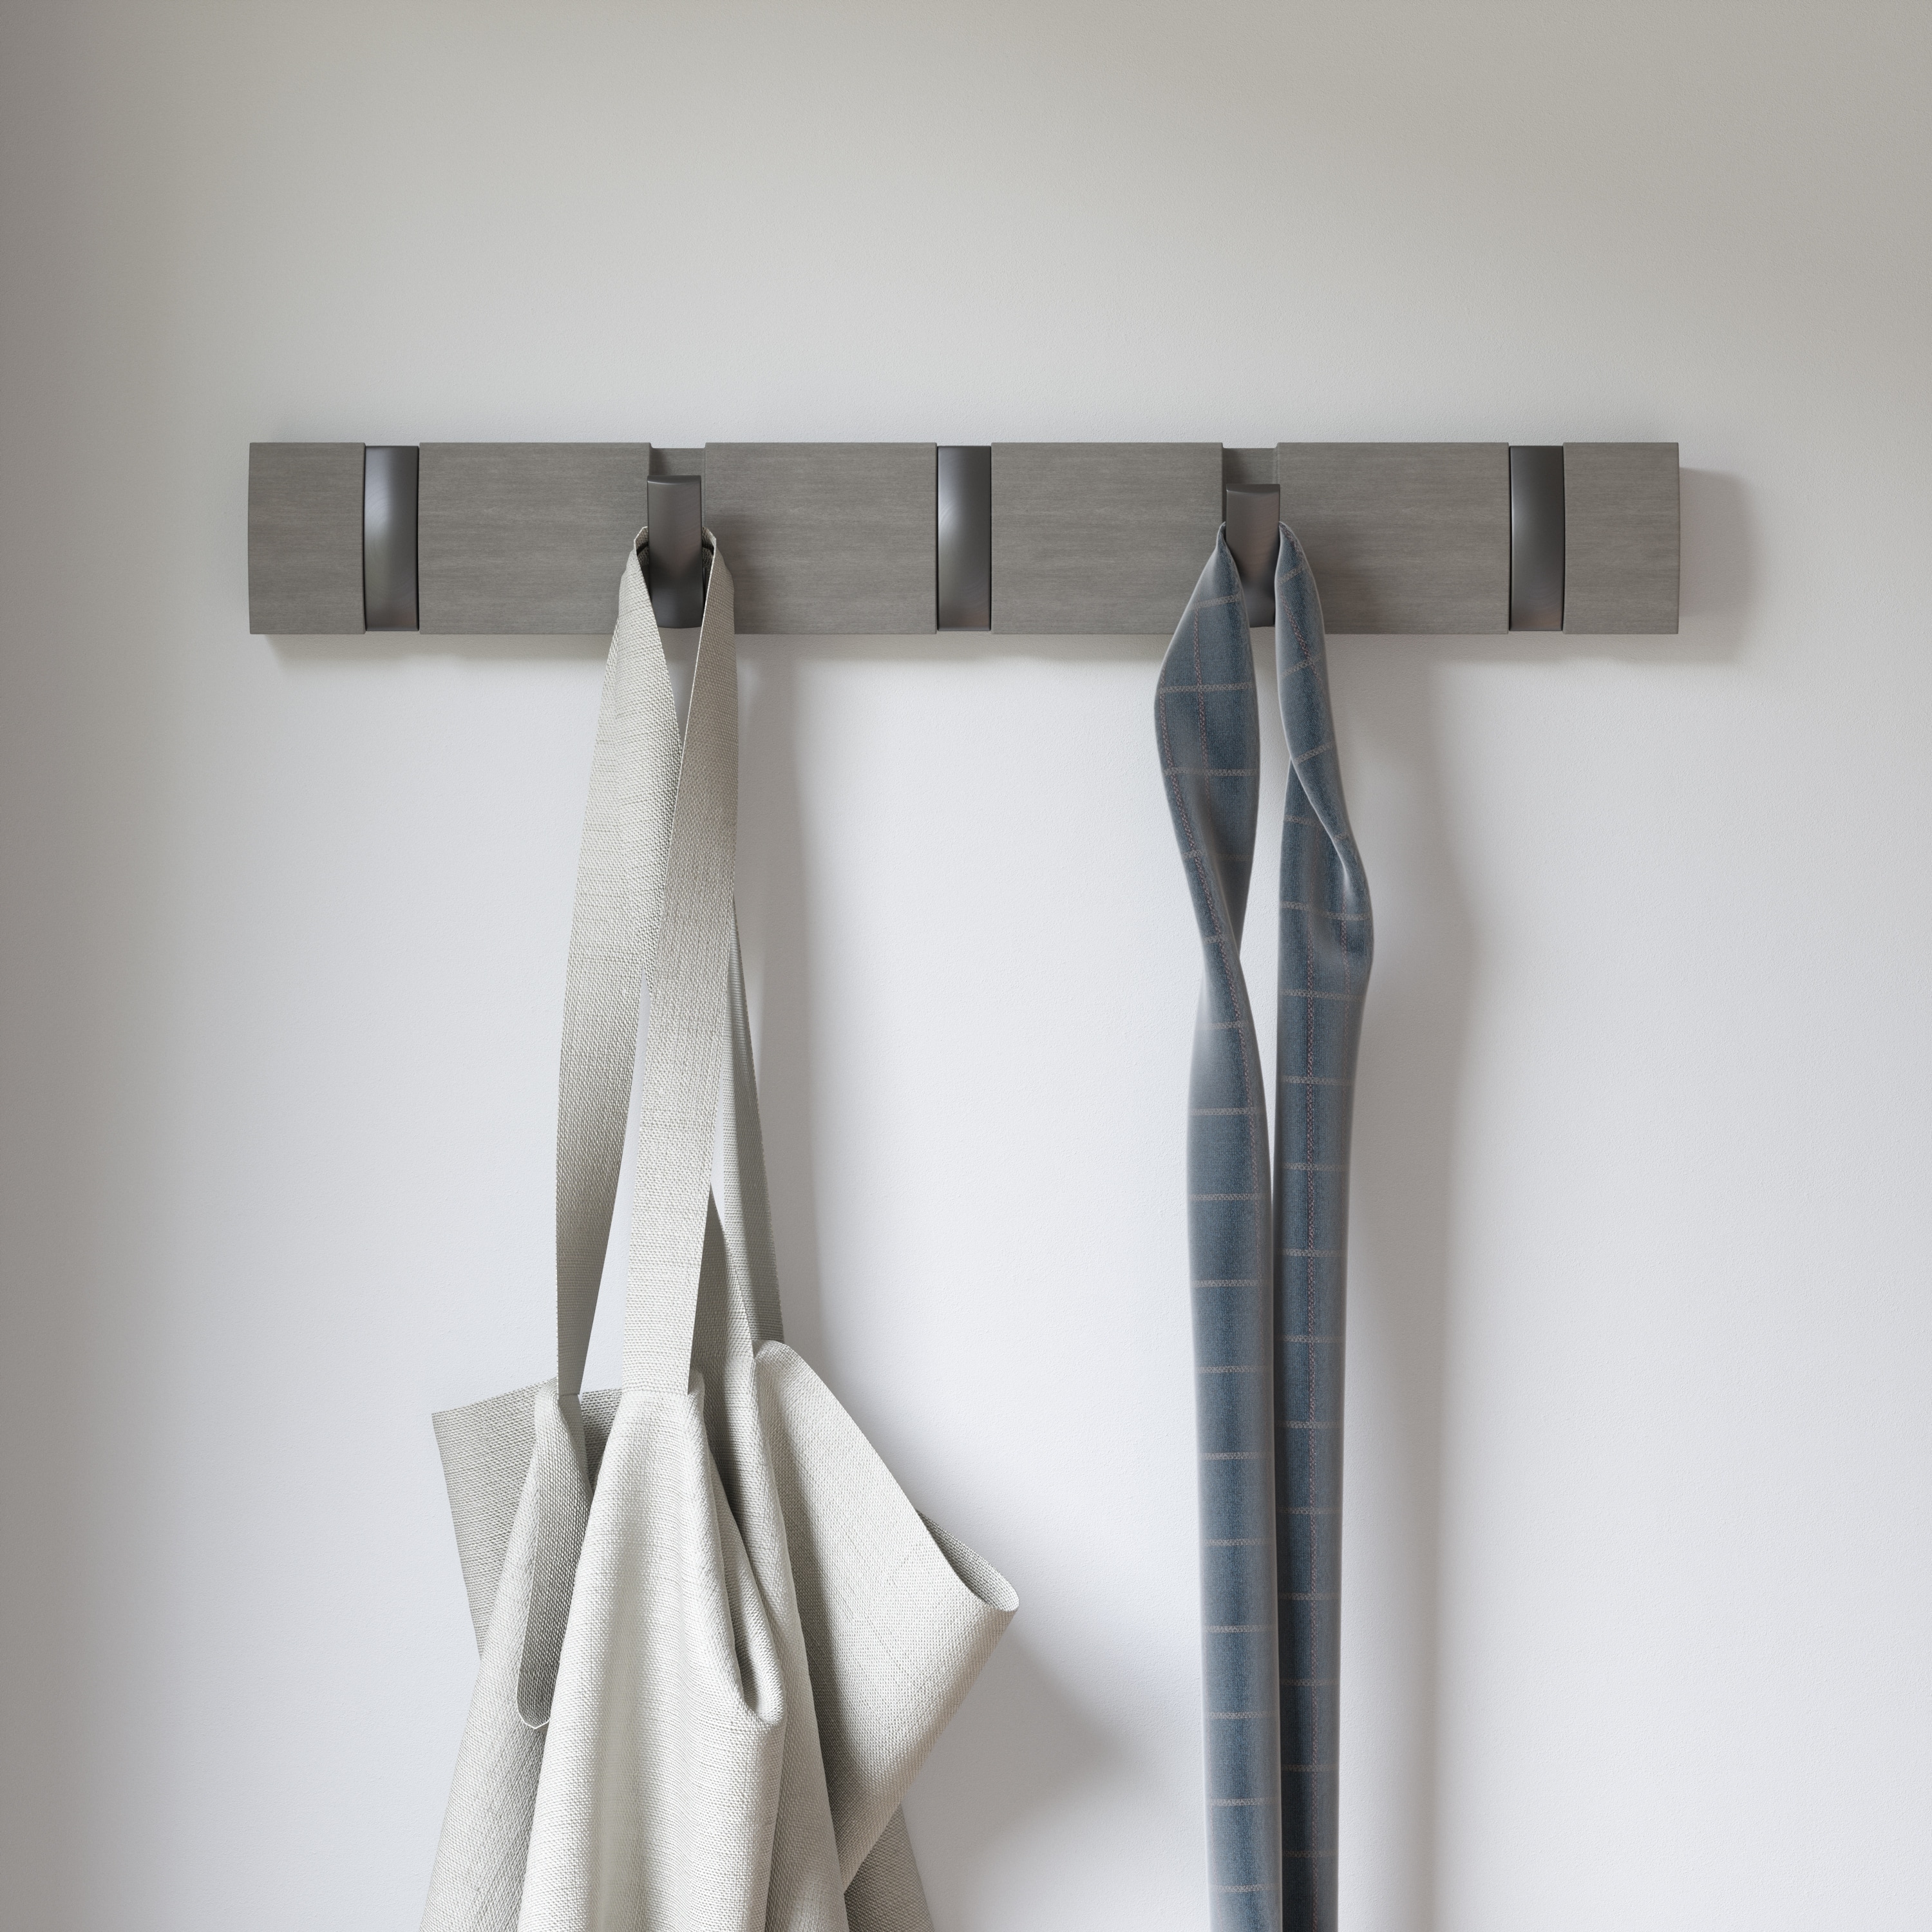 https://ak1.ostkcdn.com/images/products/is/images/direct/26fae4ee76607a4afcfc43d0d547a9fb52292d71/Umbra-Flip-Wall-Mounted-Coat-Rack.jpg